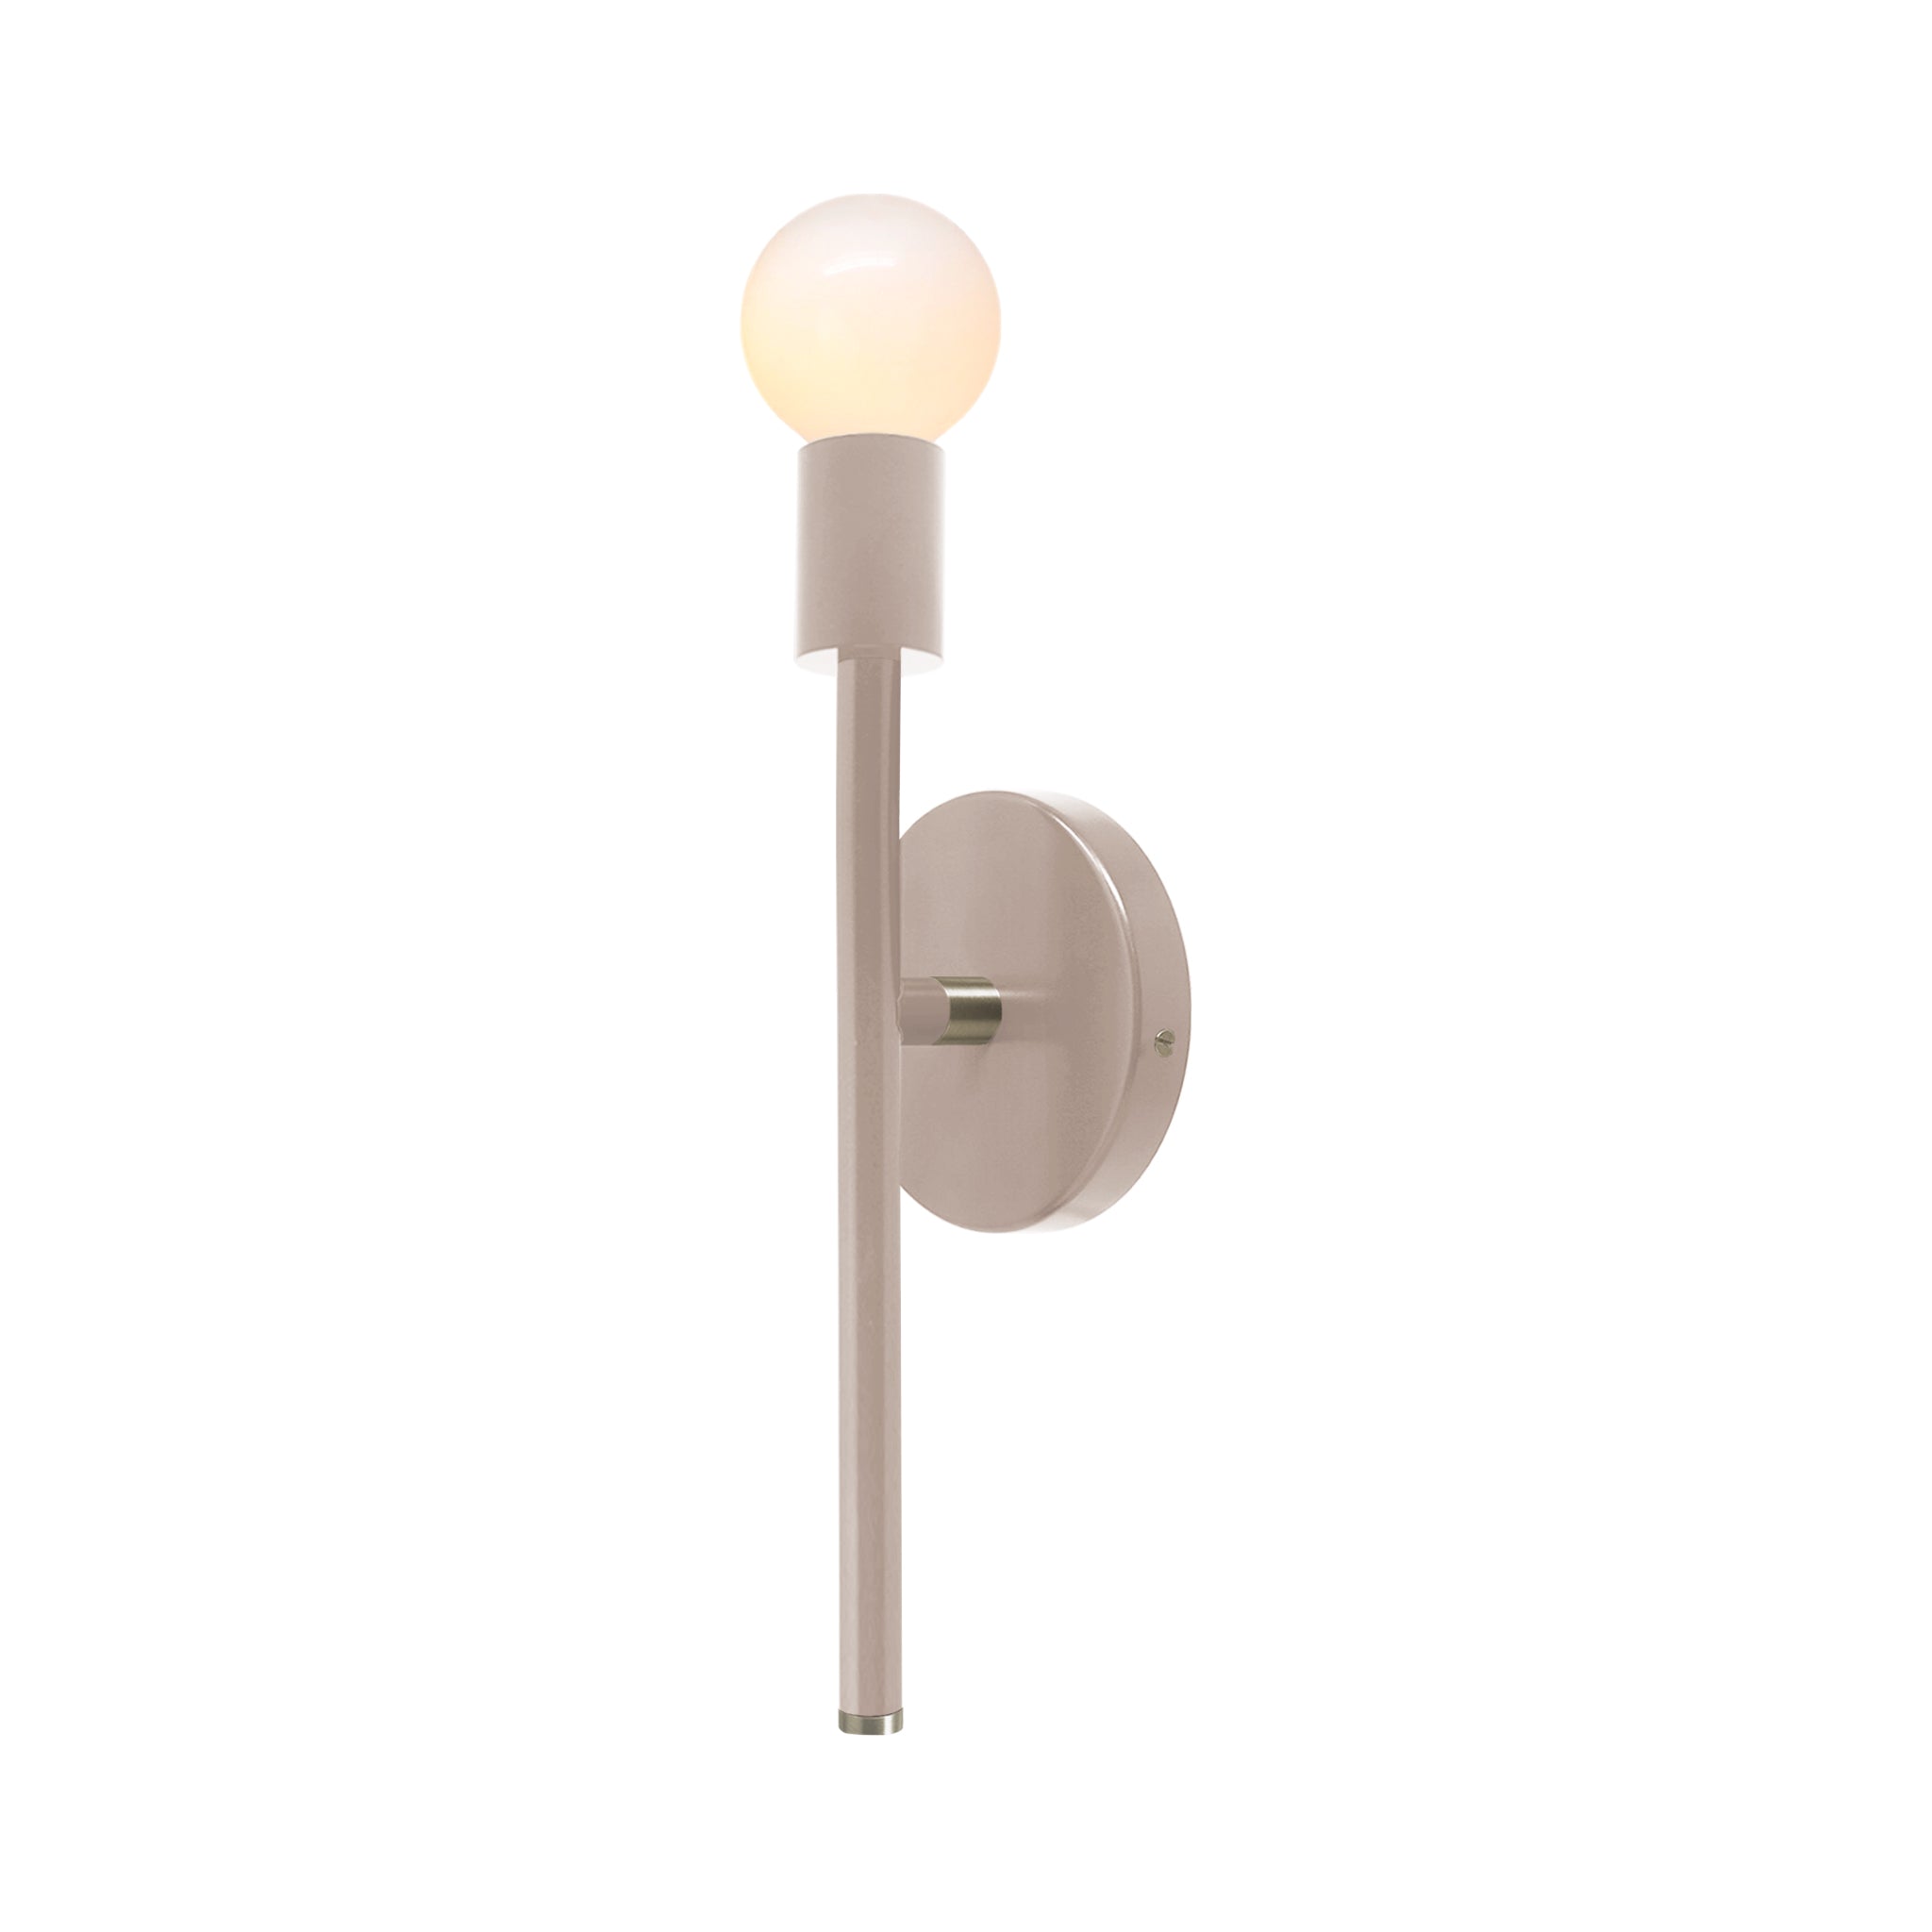 Nickel and barely color Major sconce 15" Dutton Brown lighting